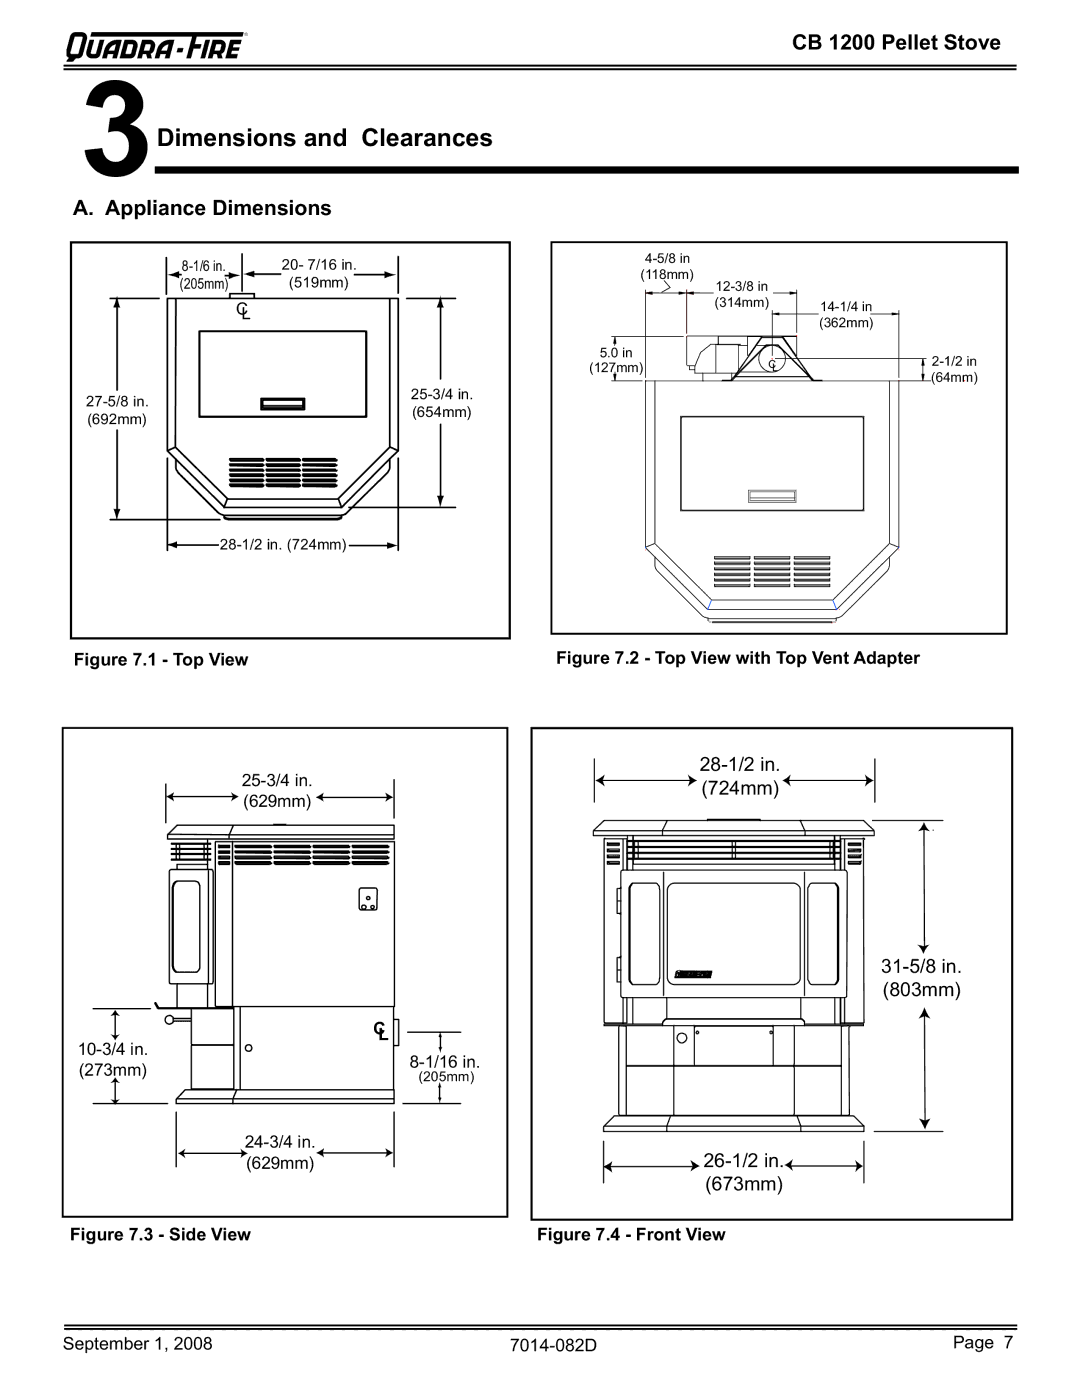 Hearth and Home Technologies CB1200-B owner manual 3Dimensions and Clearances, Appliance Dimensions 